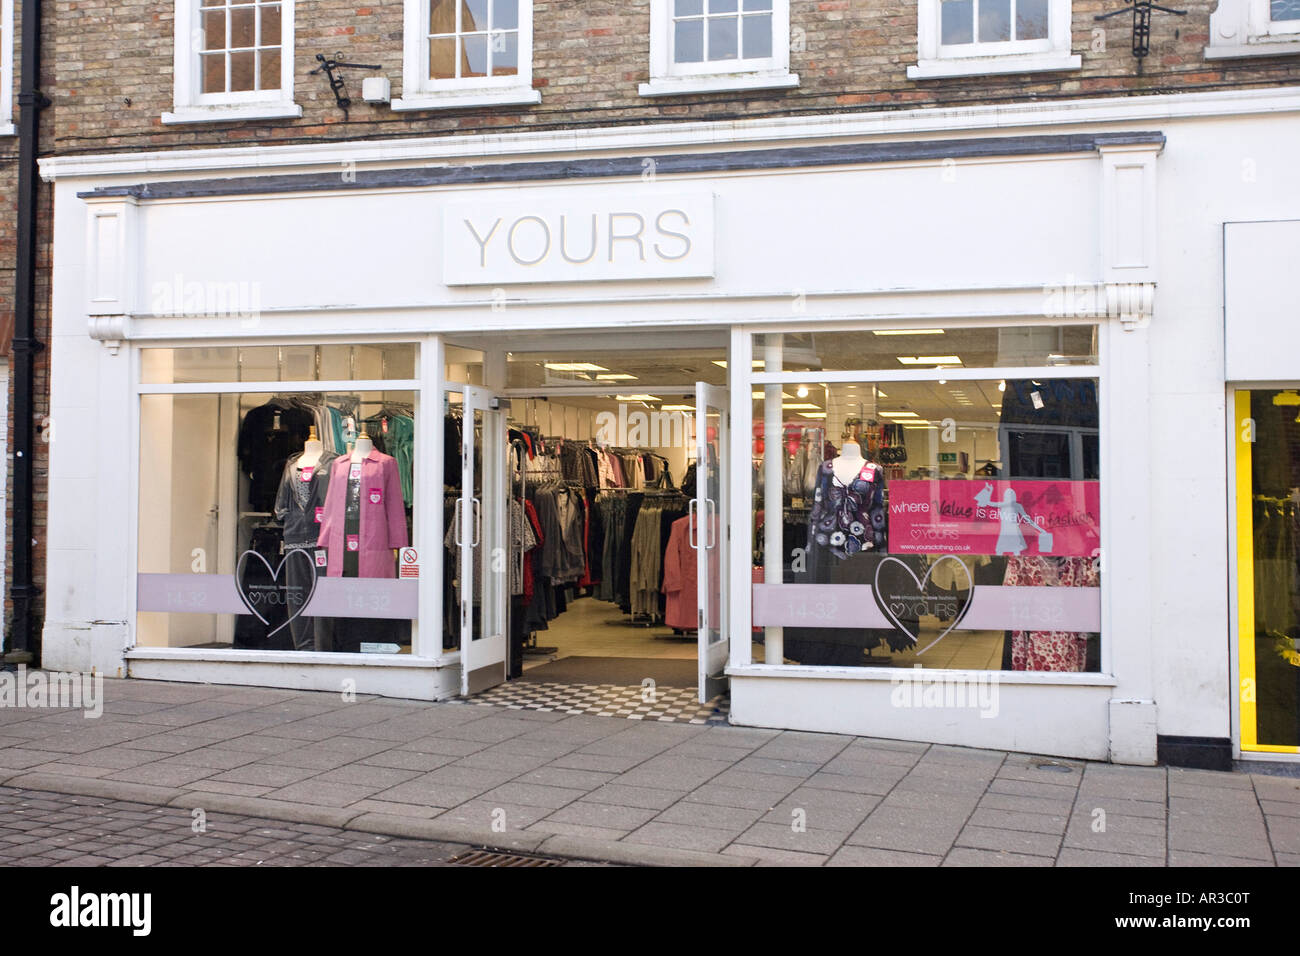 Yours clothing store in Thetford, UK Stock Photo